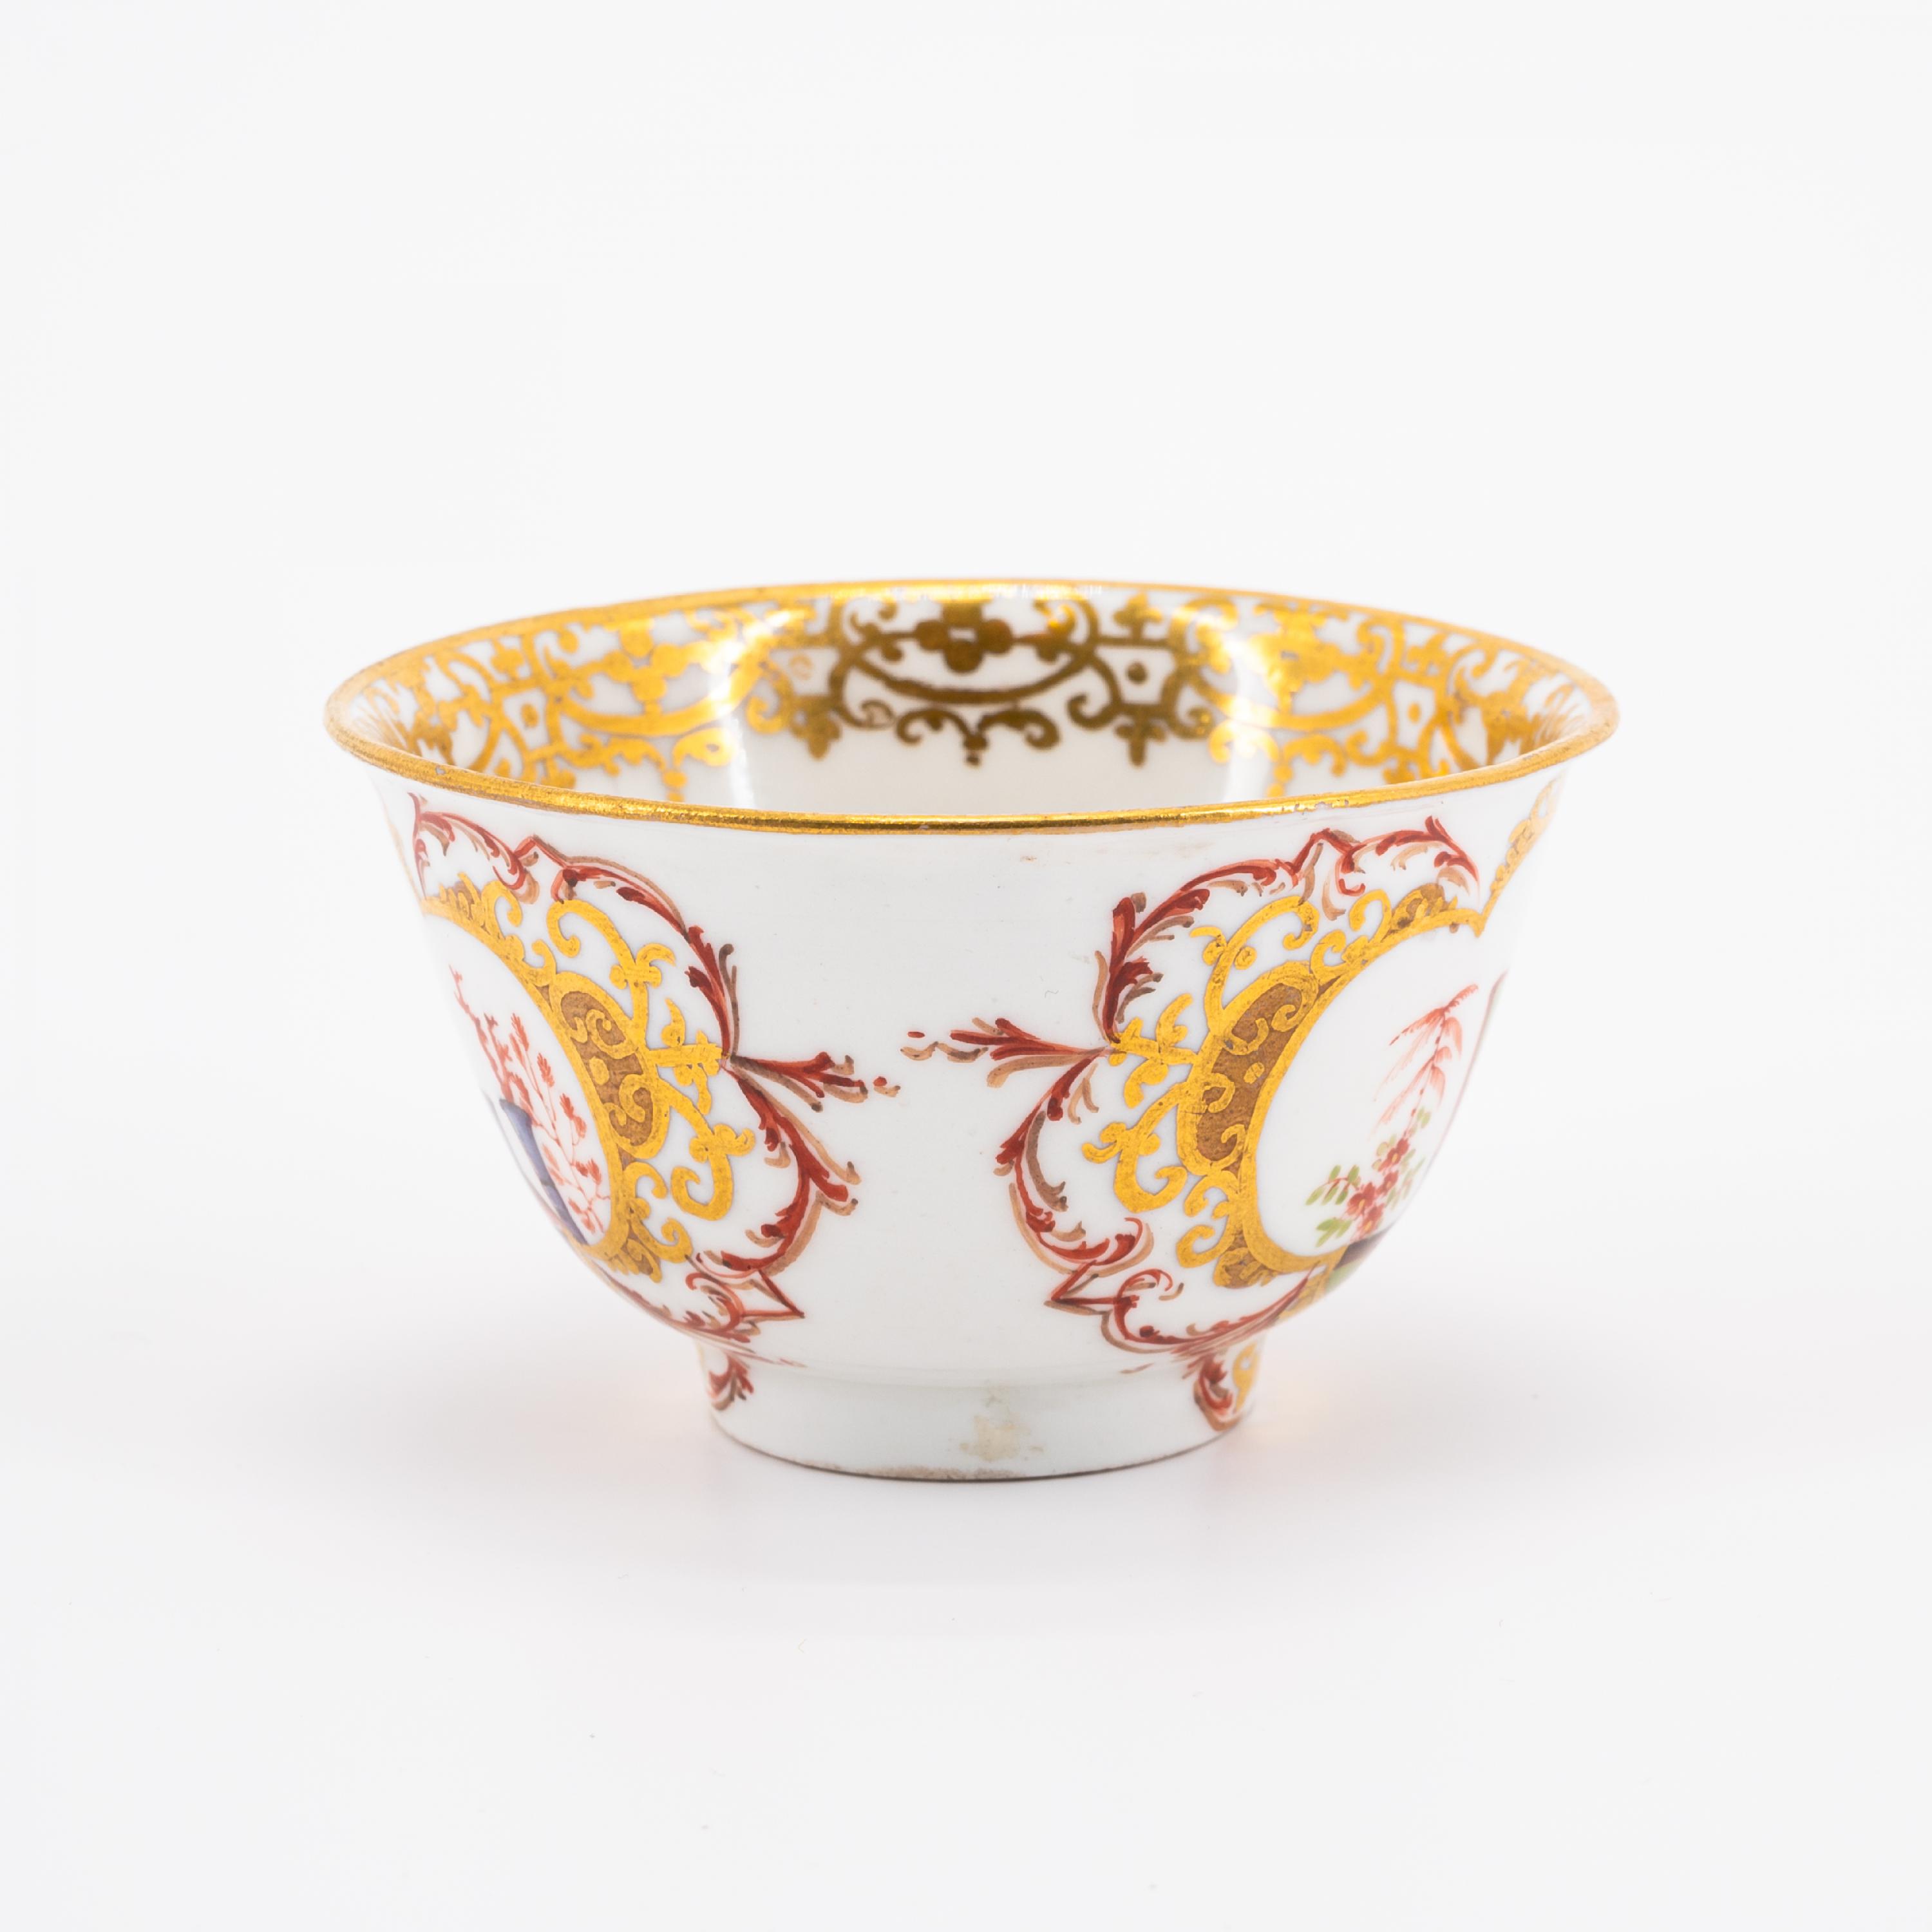 PORCELAIN TEA BOWL WITH CHINOISERIES - Image 4 of 6